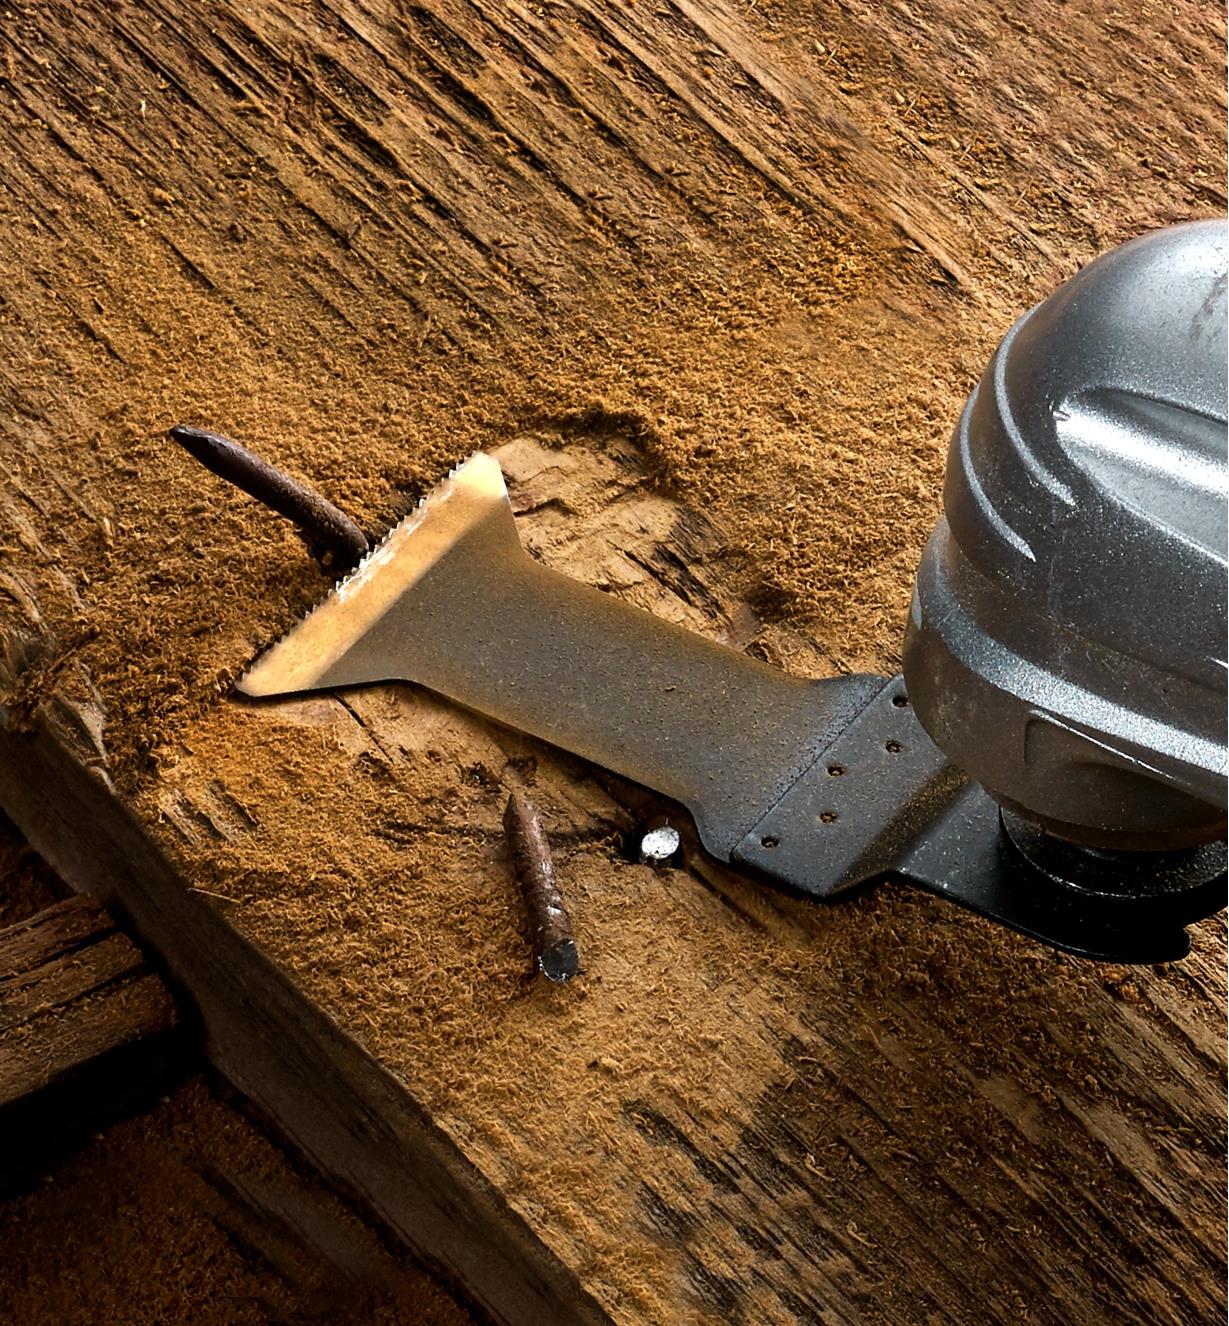 A multi-tool and titanium-nitride-coated blade used to cut nails in reclaimed barnboard